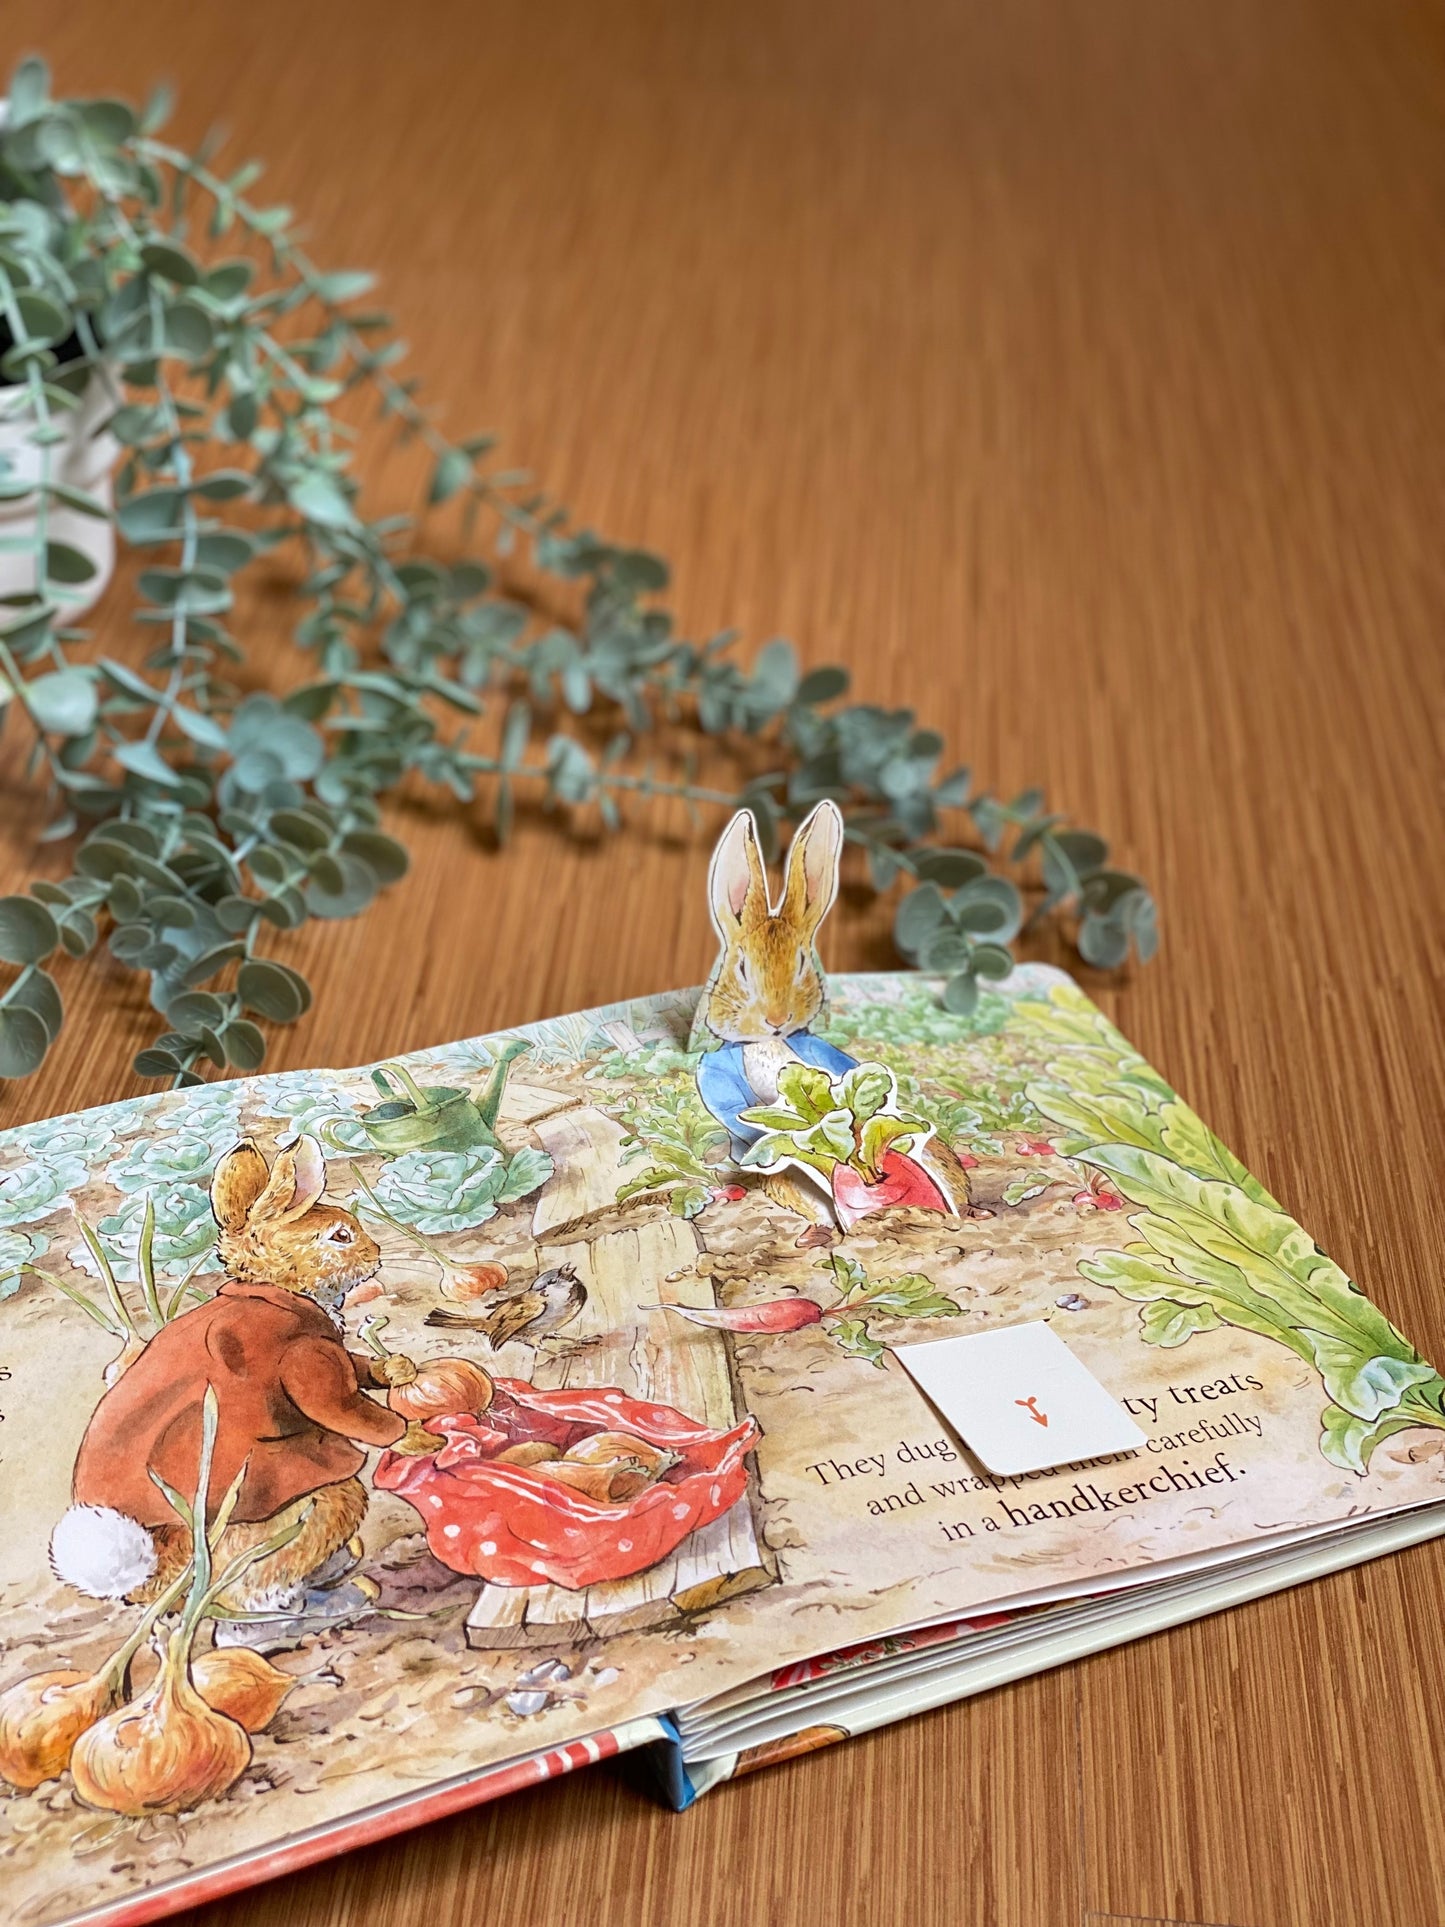 Peter Rabbit: Peter's Picnic A Pull-Tab and Play Book